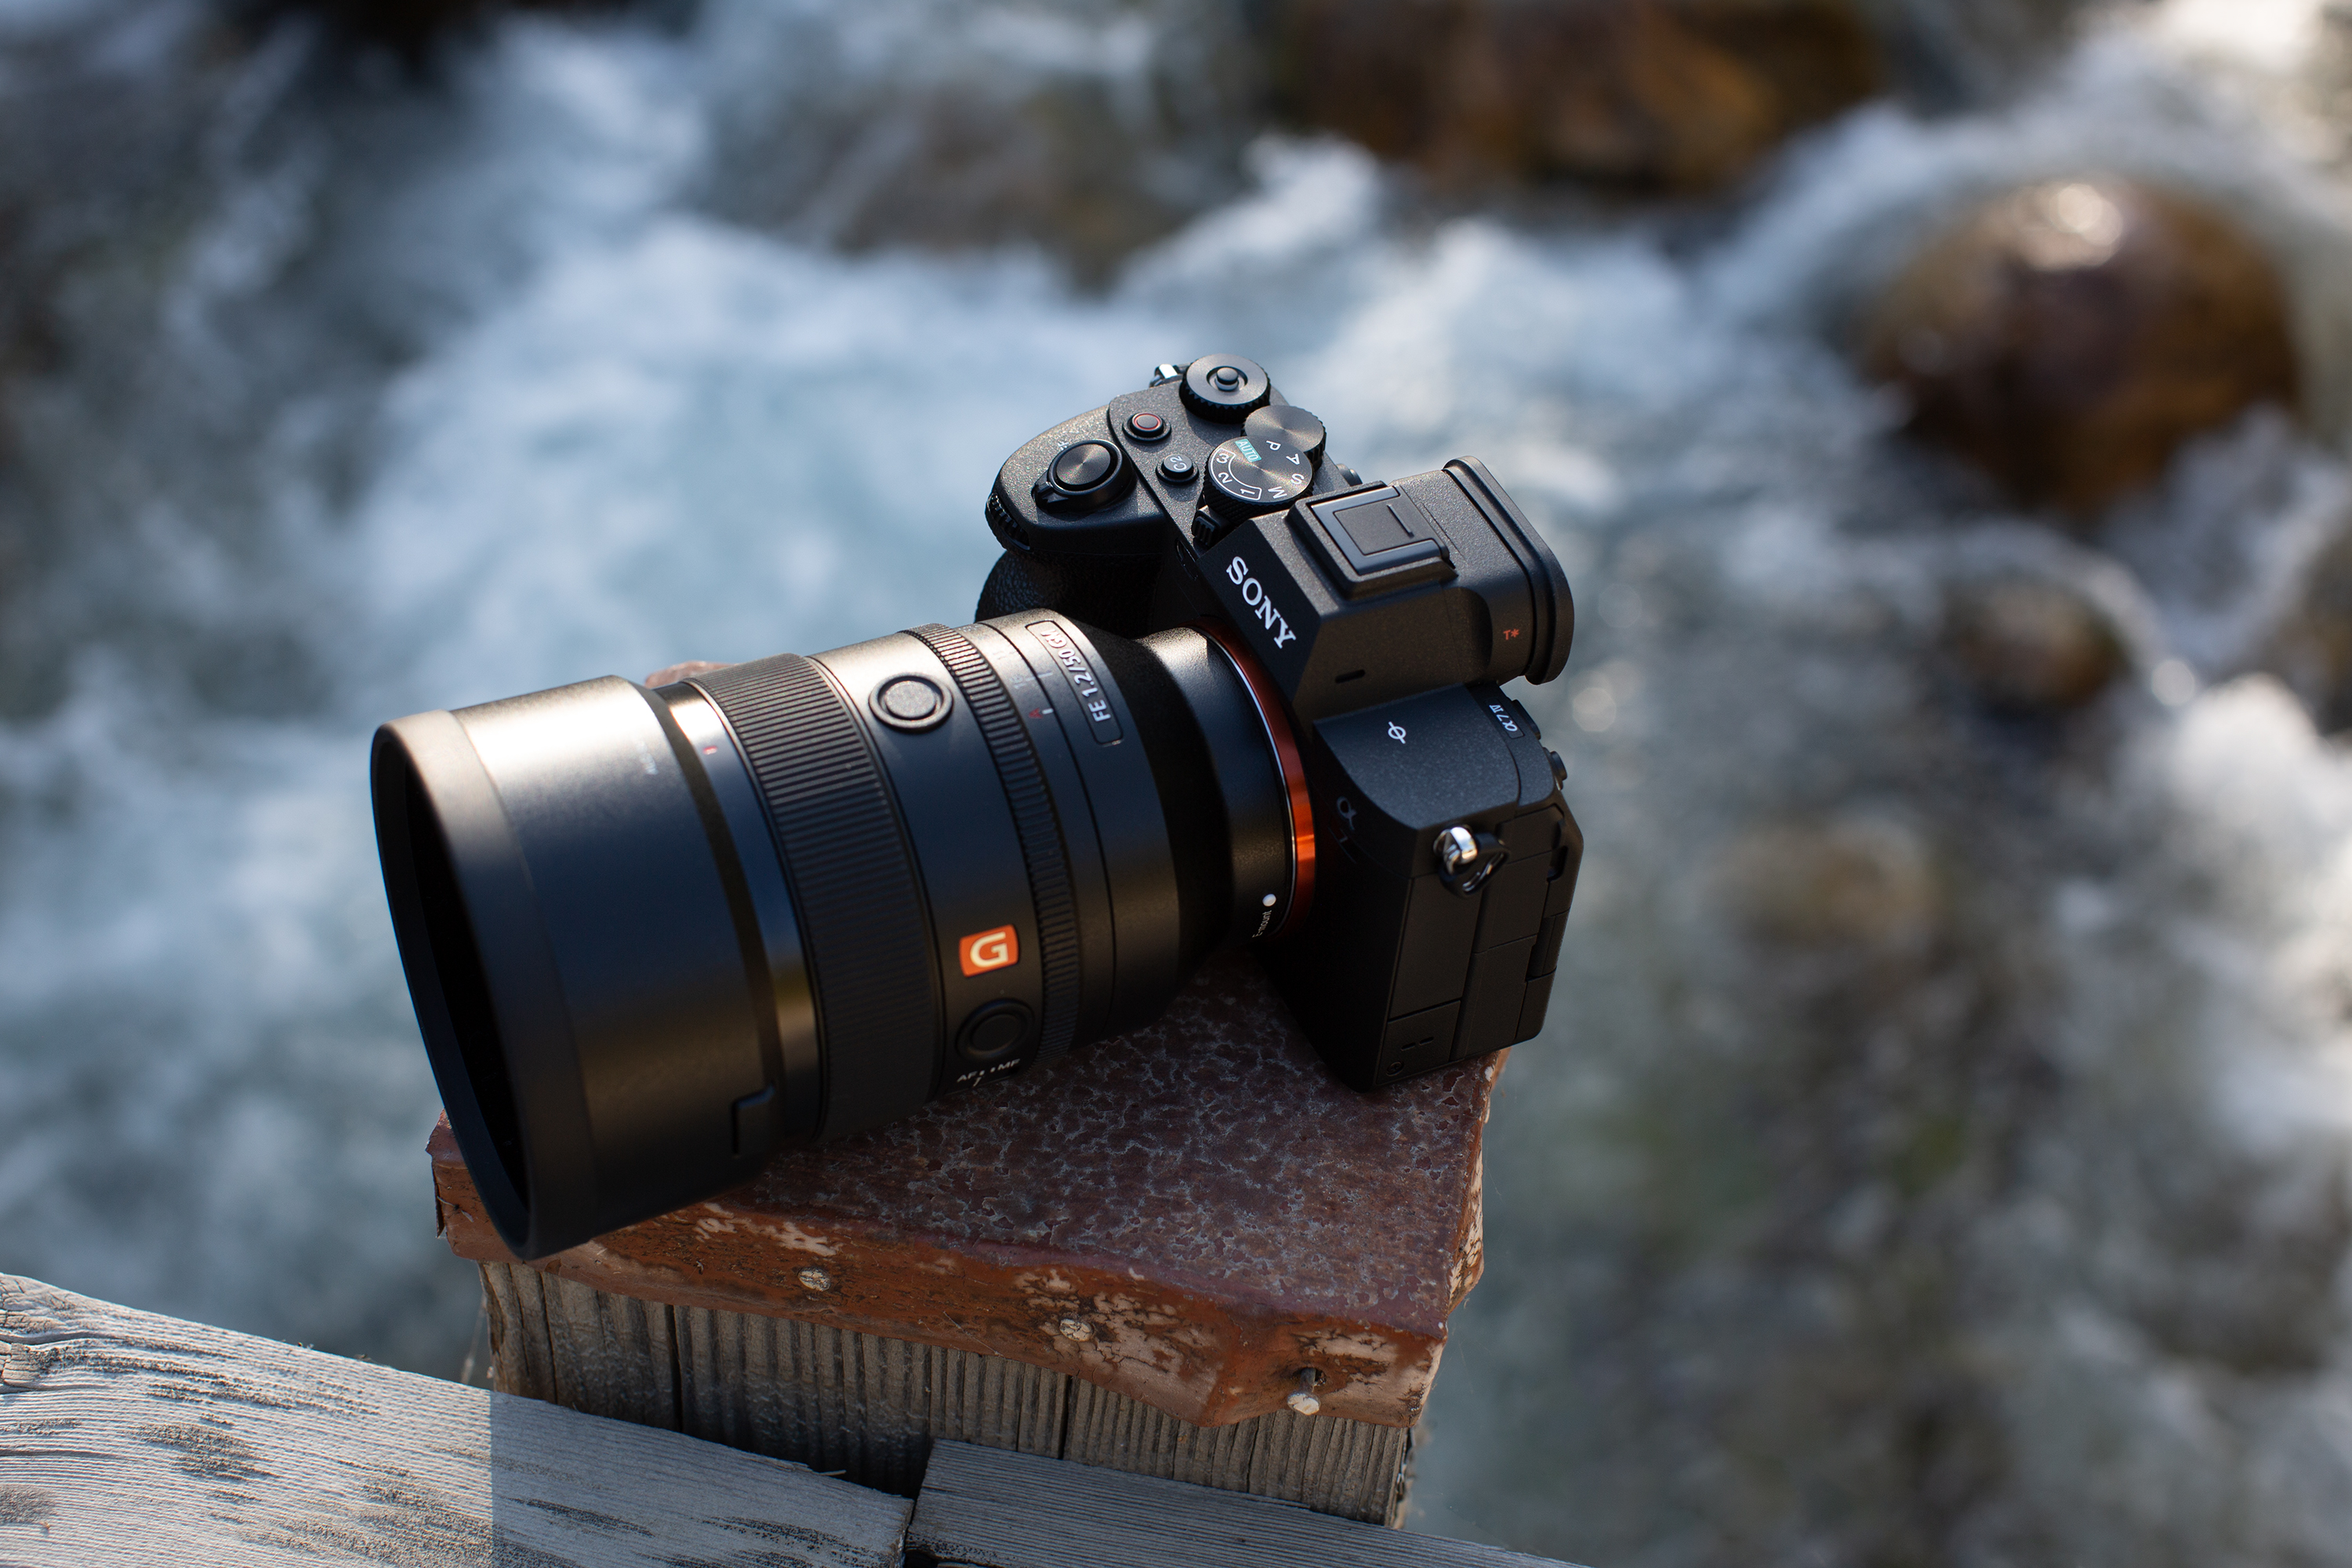 Sony Alpha 7 IV Review